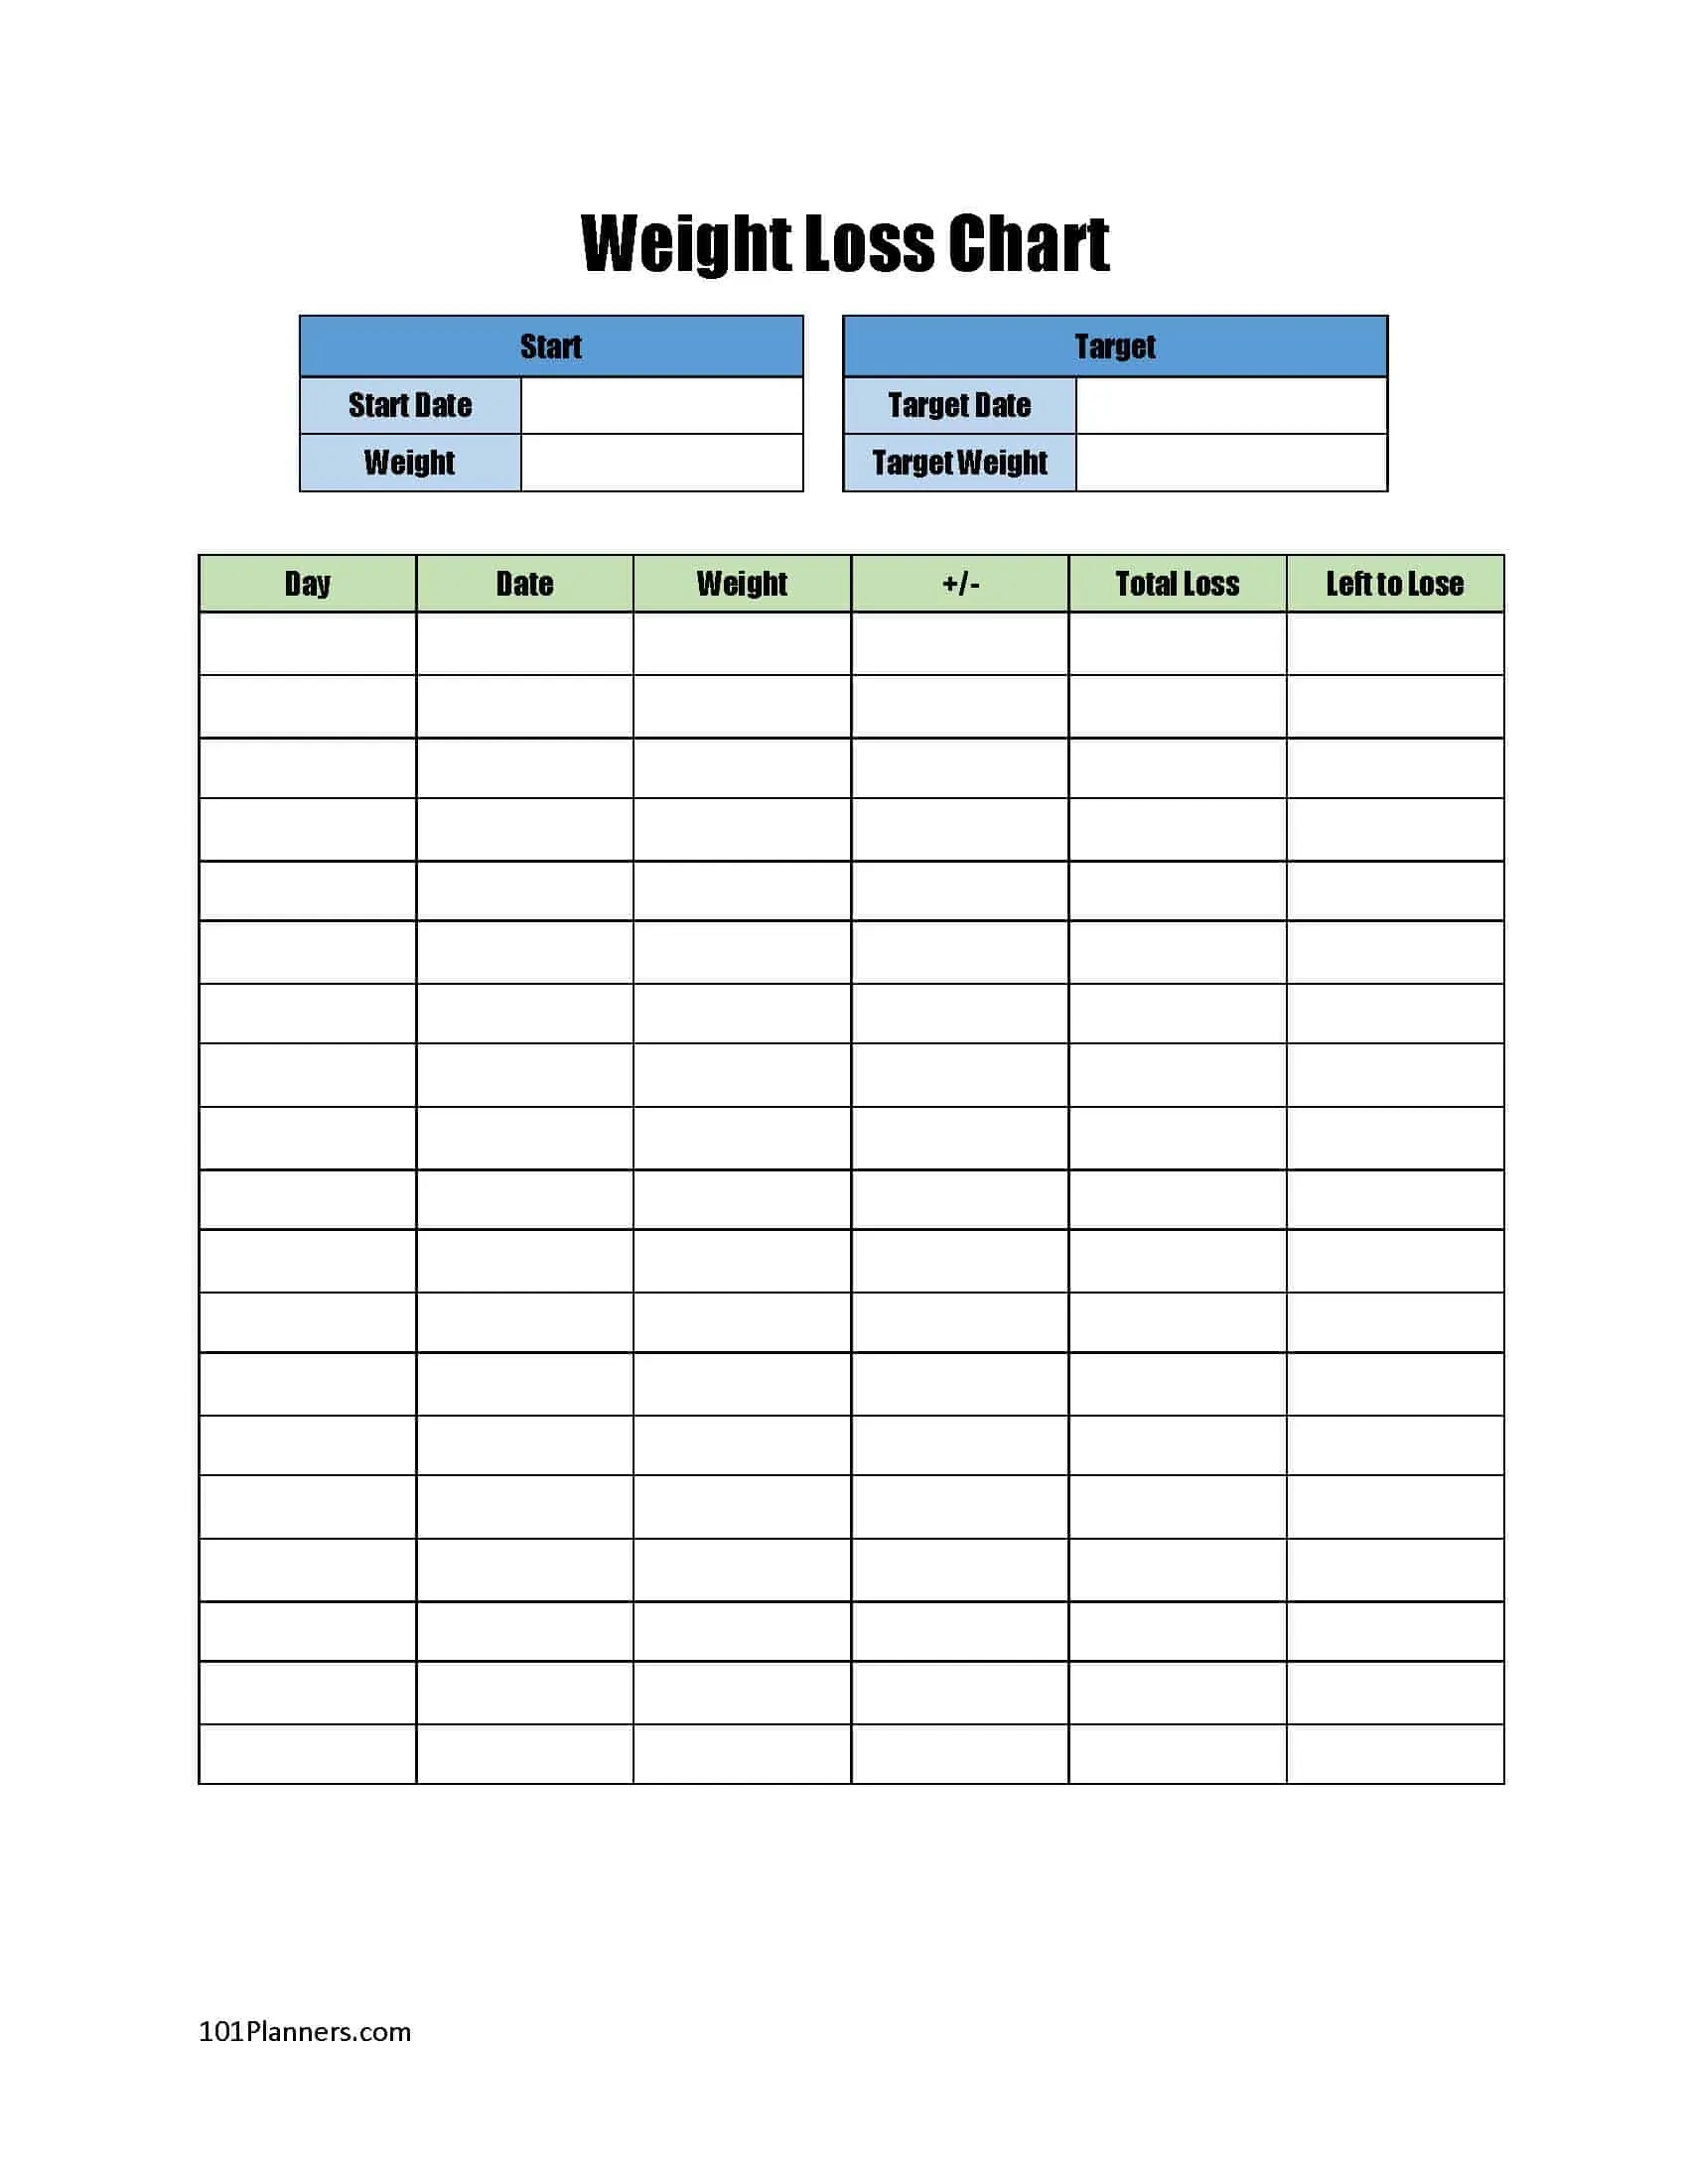 Free Weight Loss Tracker Printable | Customize Before You Print